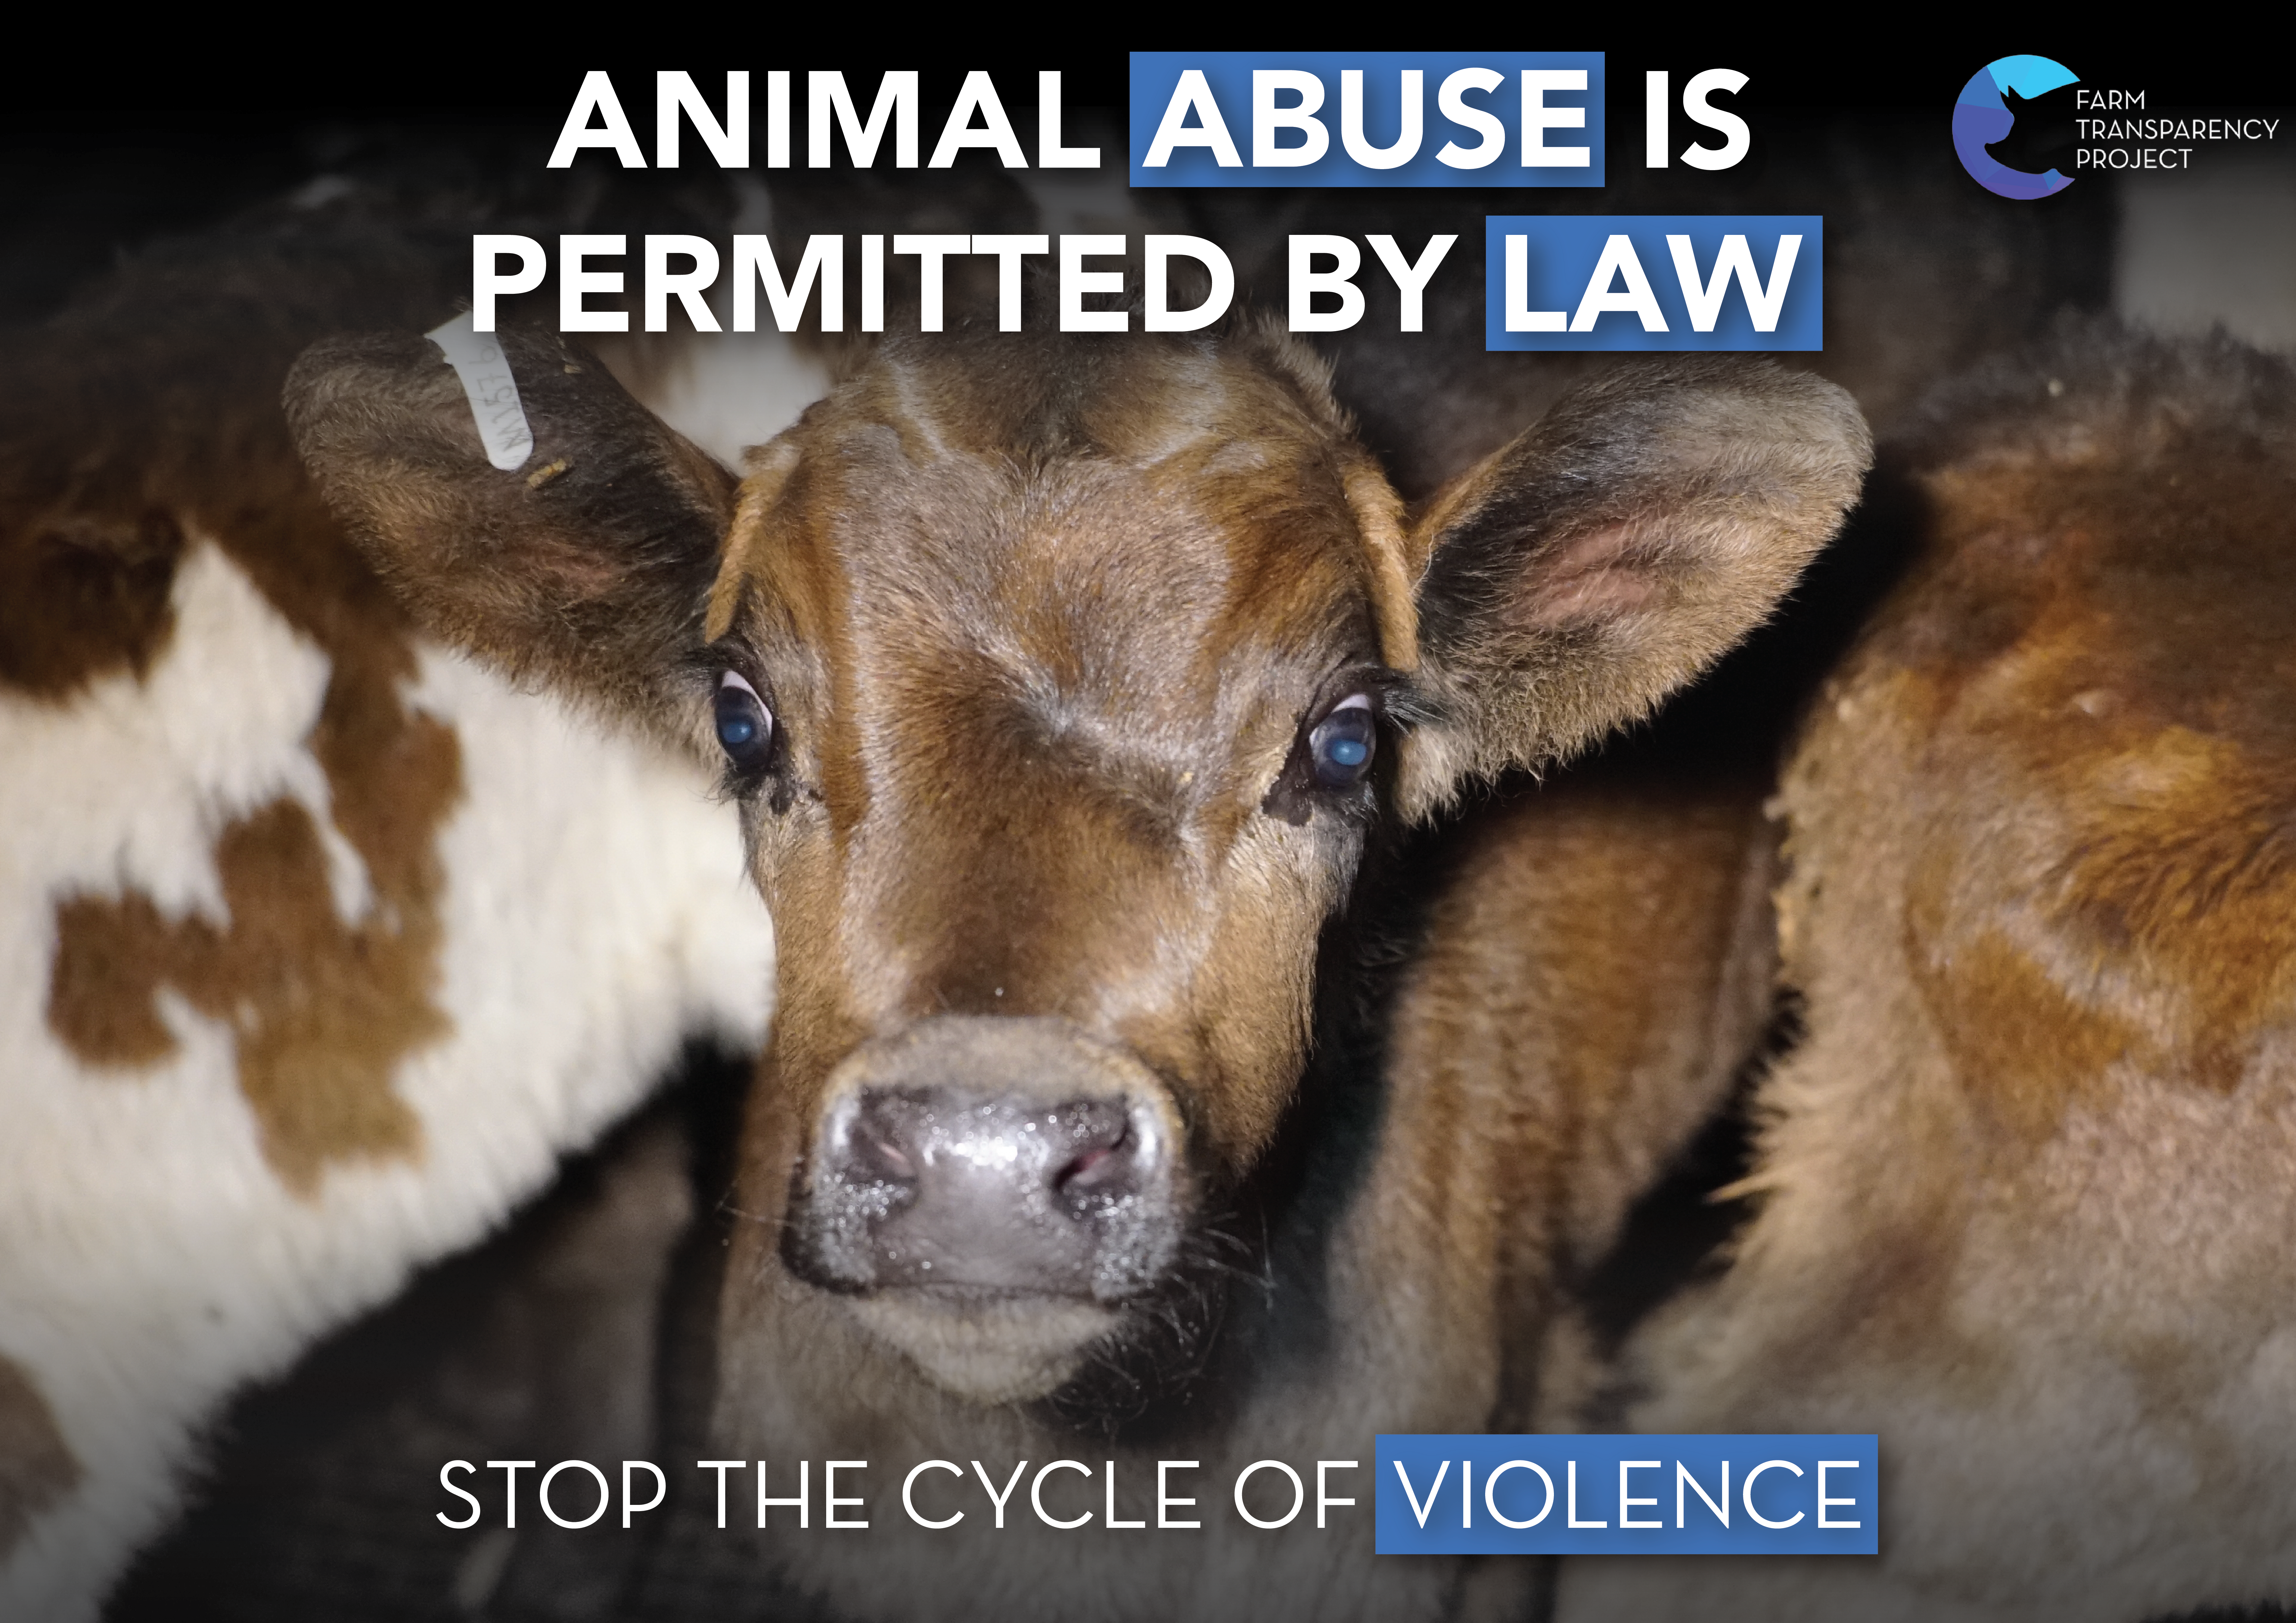 Animal Abuse Is Permitted by Law (Calf) - Placard Design